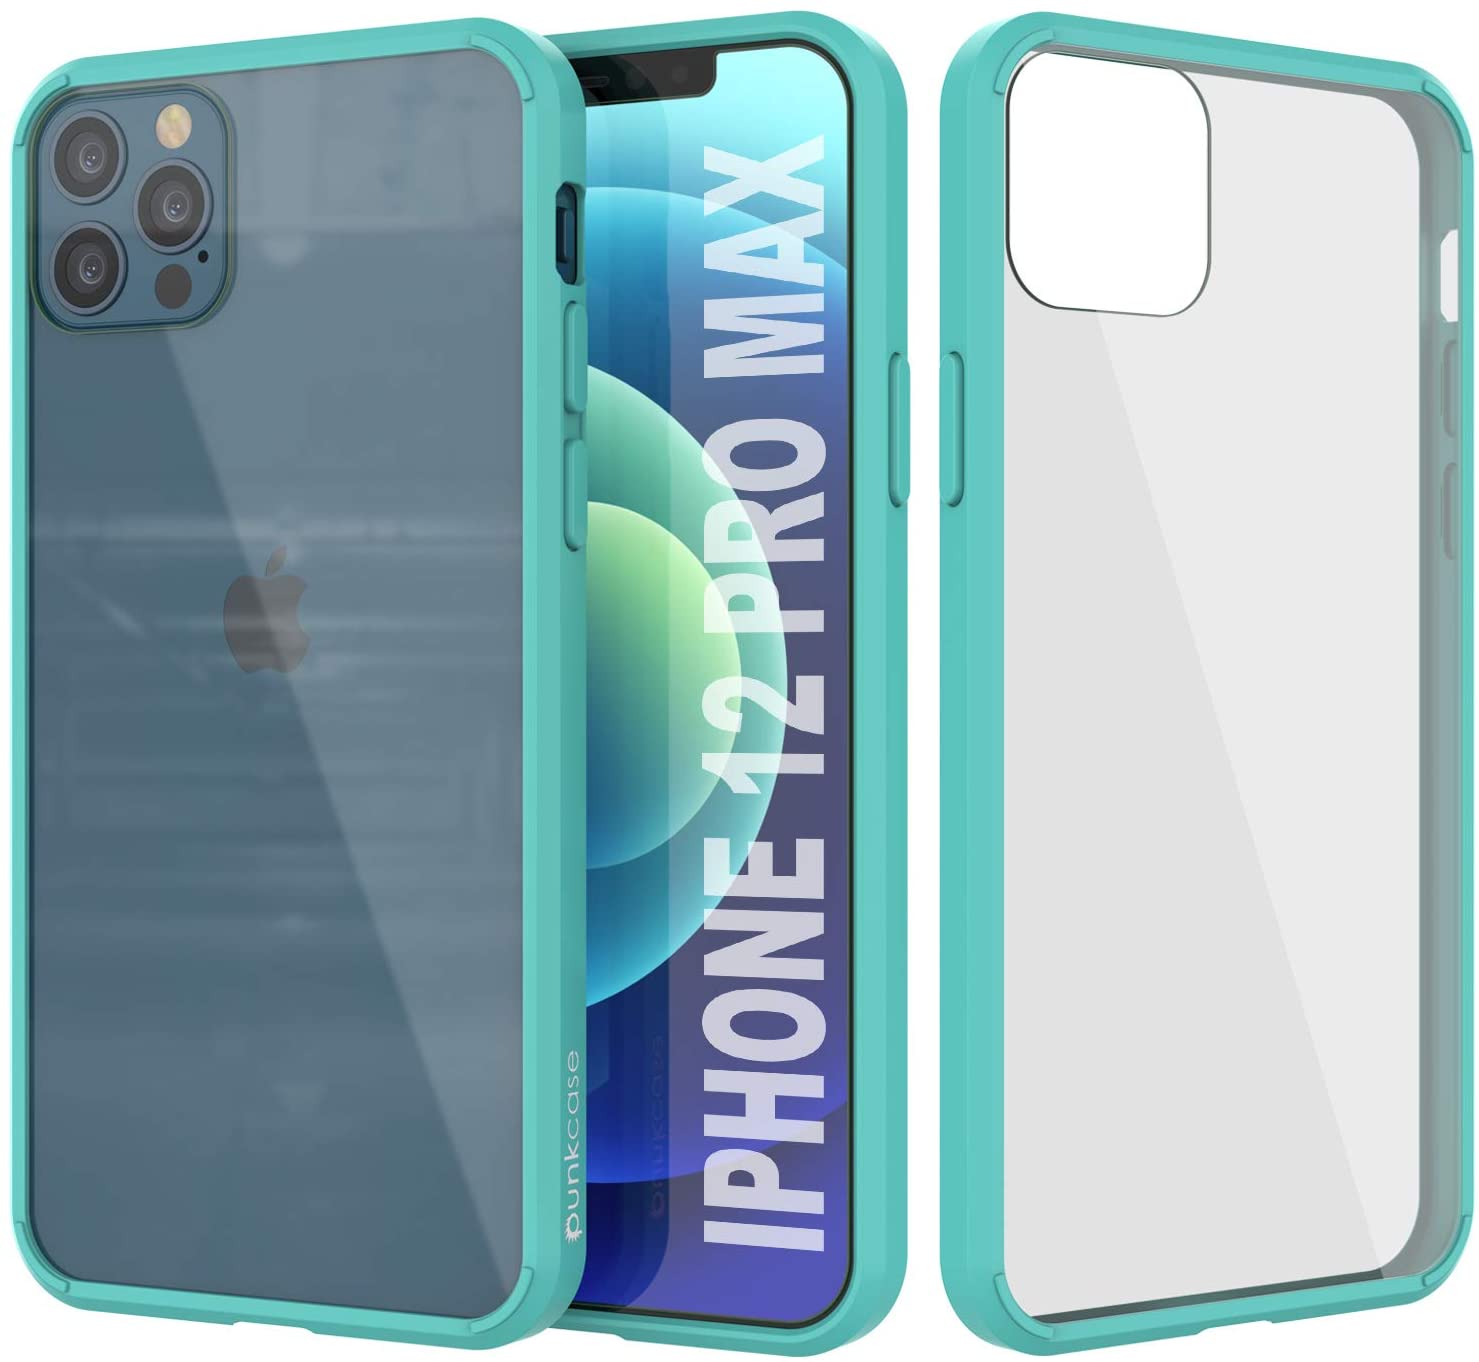 iPhone 12 Pro Max Case Punkcase® LUCID 2.0 Teal Series w/ PUNK SHIELD Screen Protector | Ultra Fit